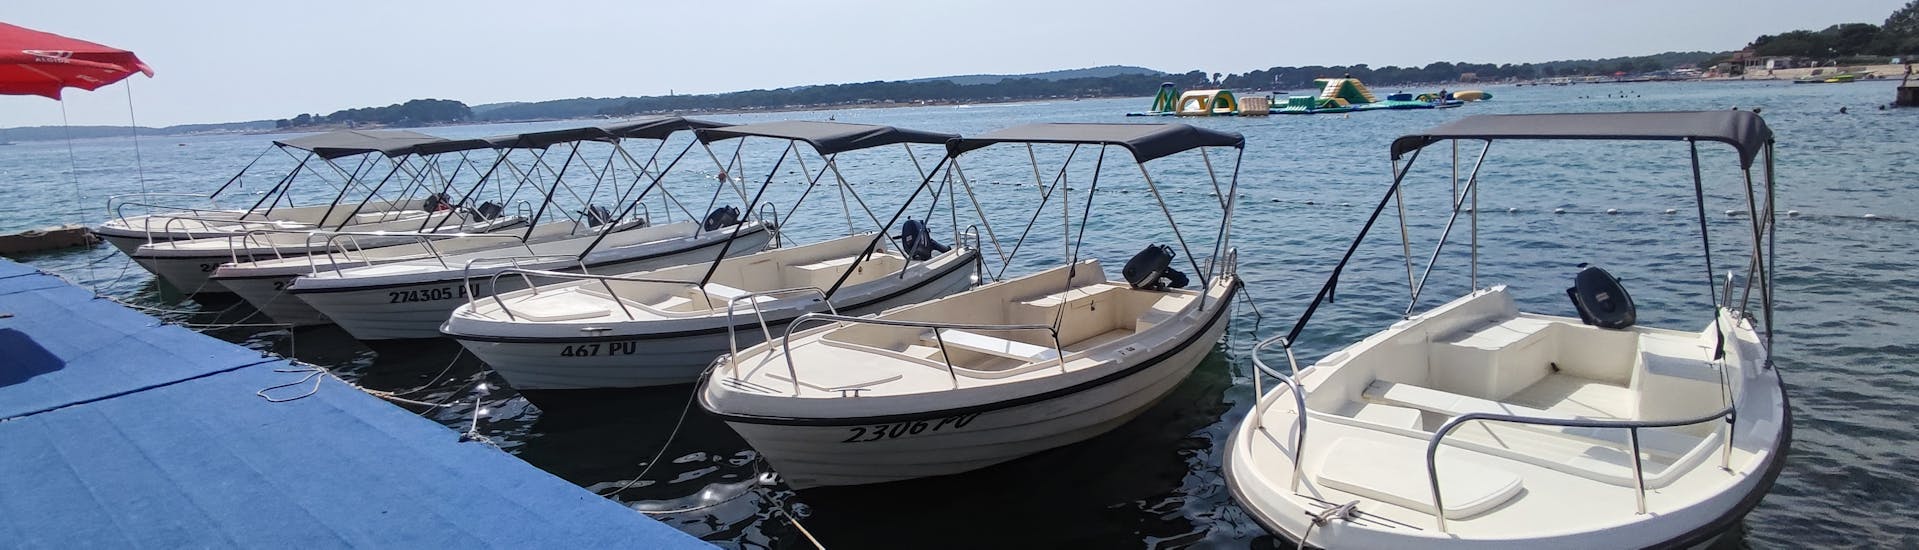 Boats that can be rented by the boat rental service in Medulin with Acqua Life Medulin.